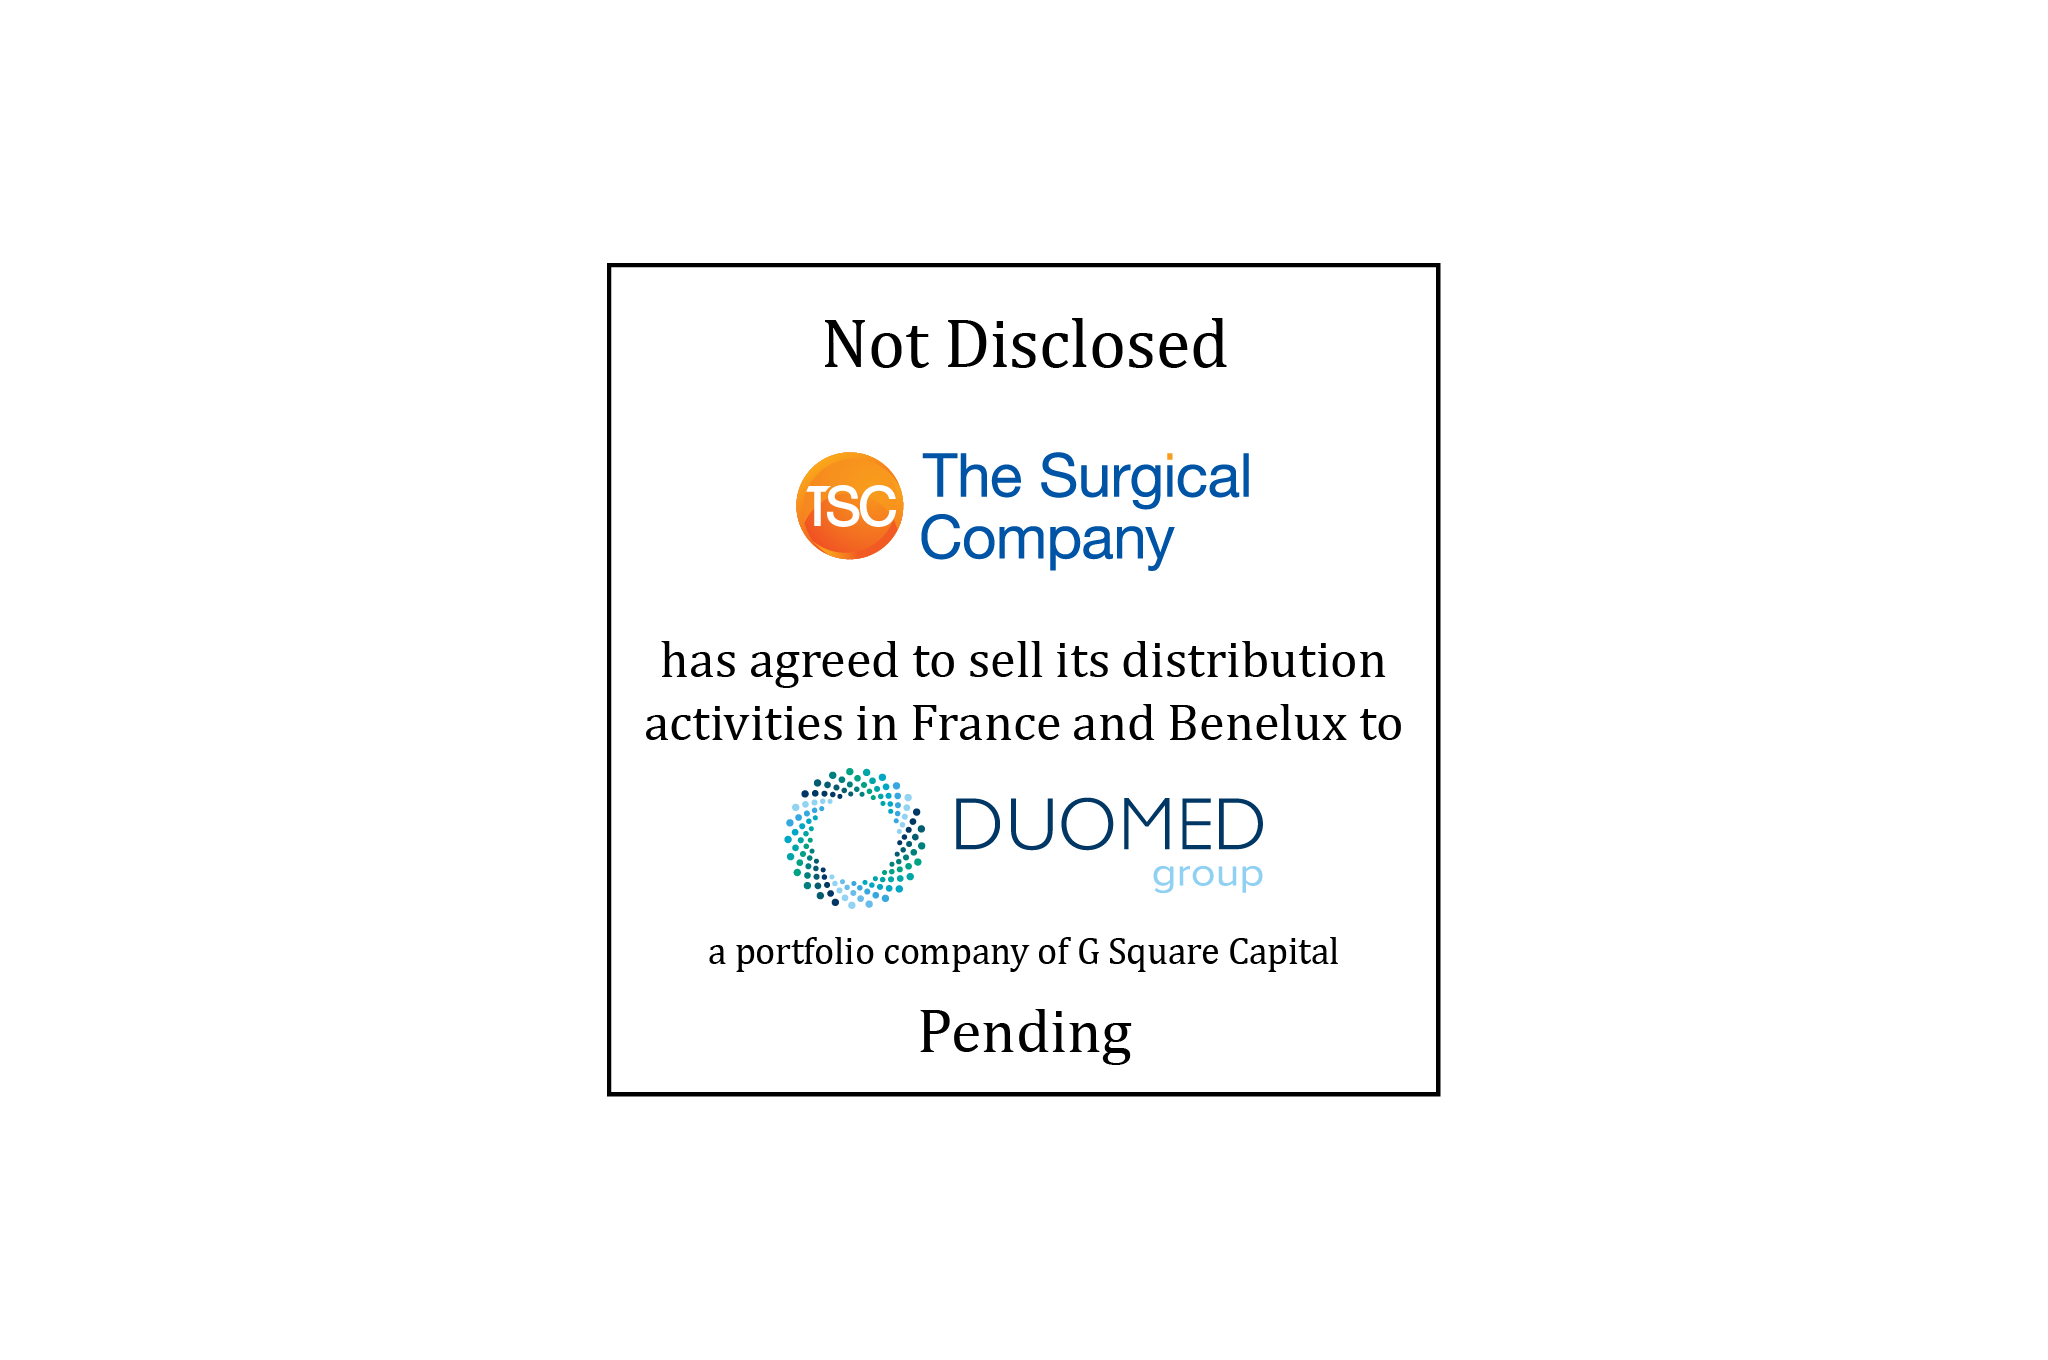 The Surgical Company/Duomed Group tombstone